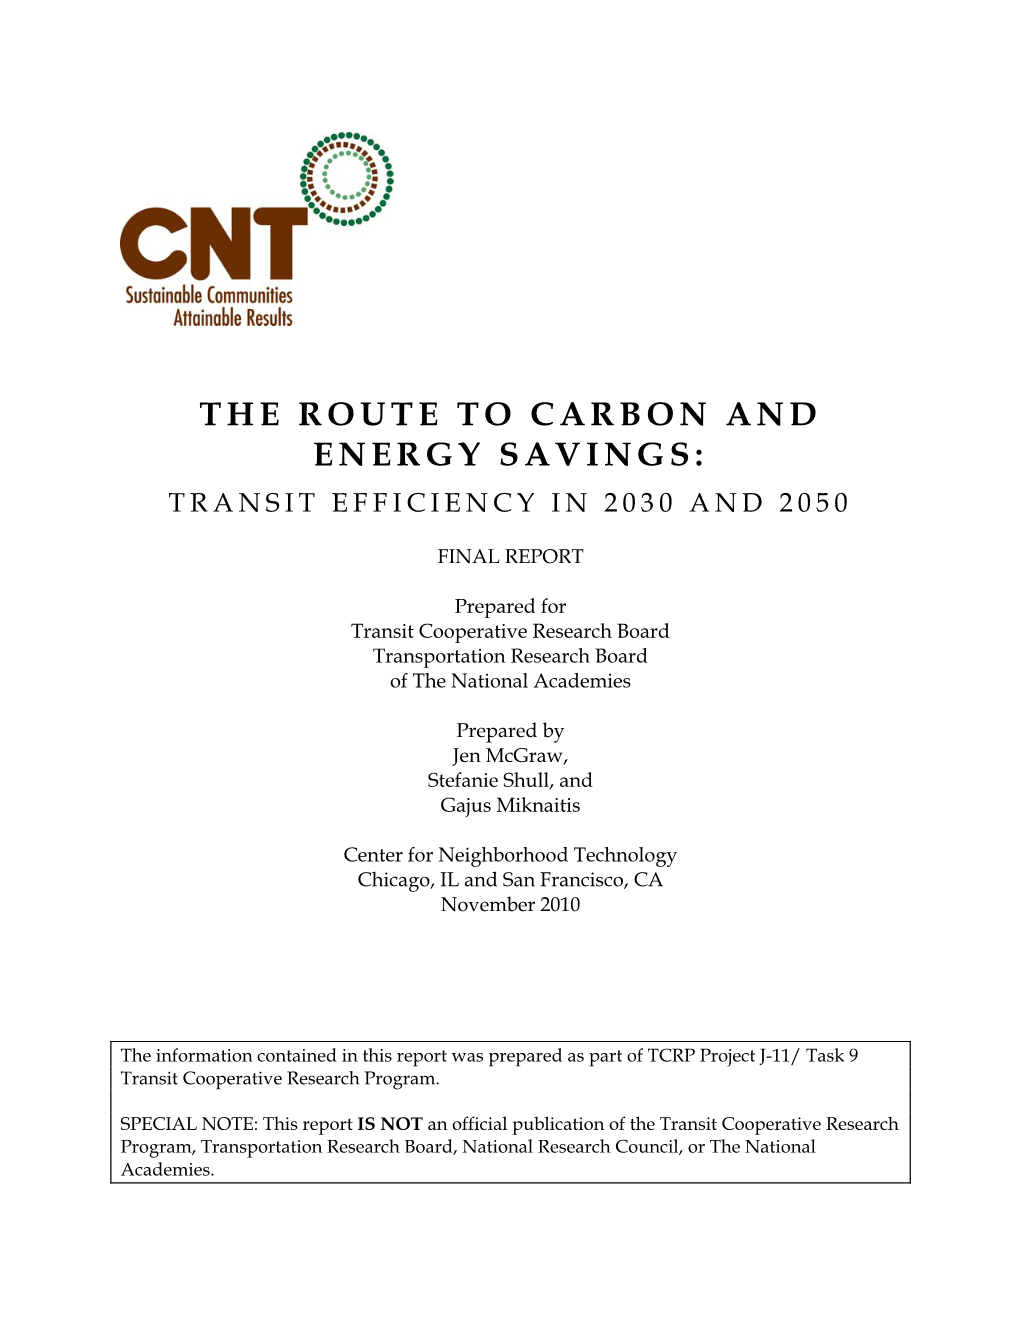 The Route to Carbon and Energy Savings: Transit Efficiency in 2030 and 2050